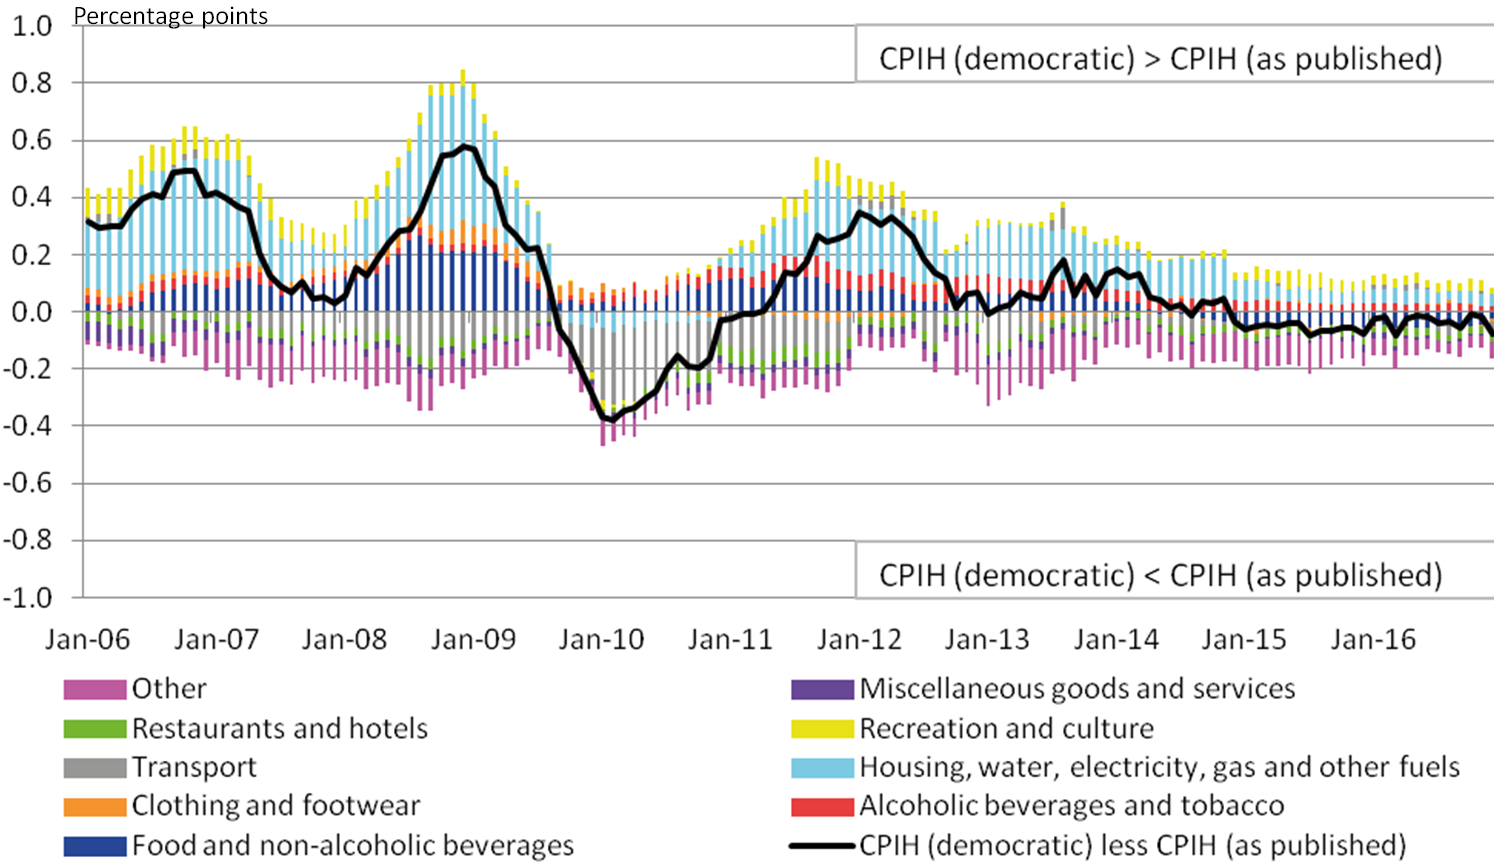 Housing, food and drink contribute to the democratically weighted CPIH growing faster than the plutocratically weighted CPIH (as published). This is partially offset by transport and 'other' which lead to the published CPIH experiencing stronger growth. The differences have converged since 2014.